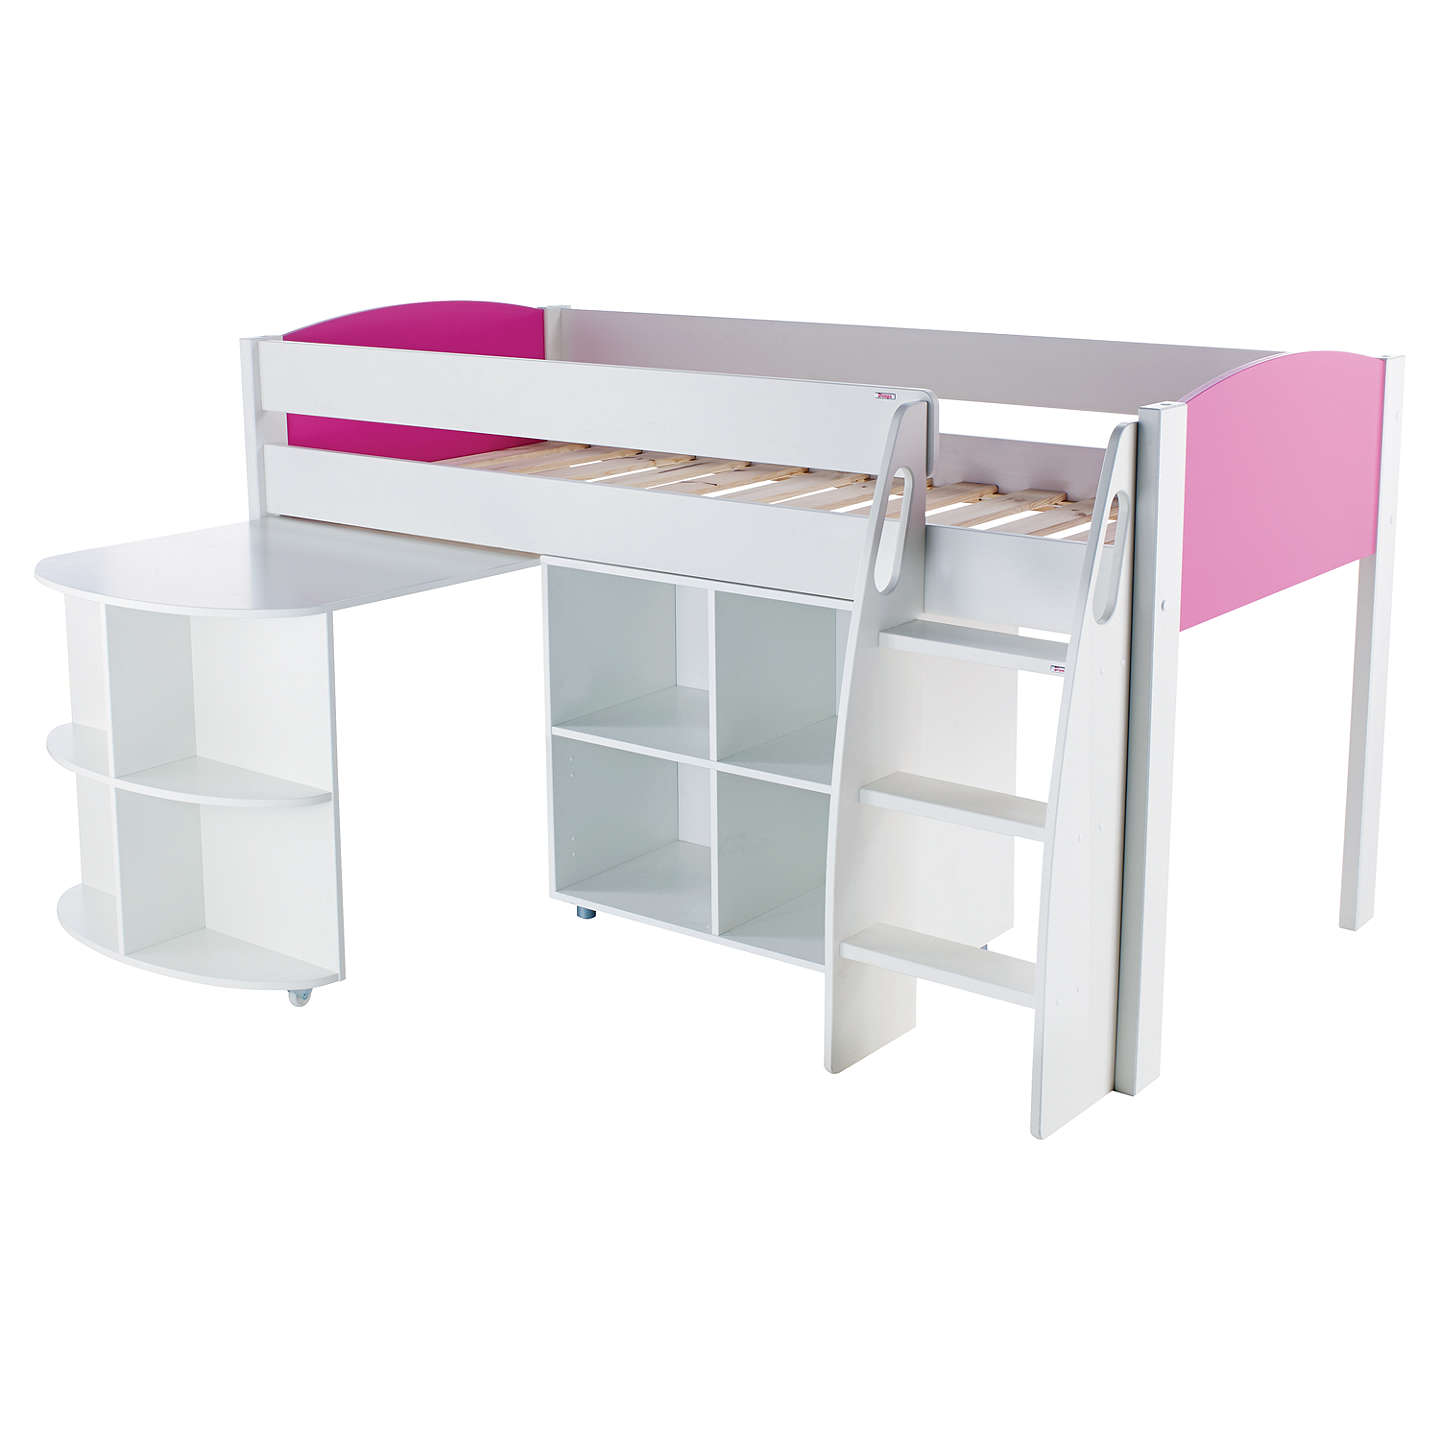 Stompa Uno S Plus Mid-Sleeper Bed with Pull-Out Desk and ...